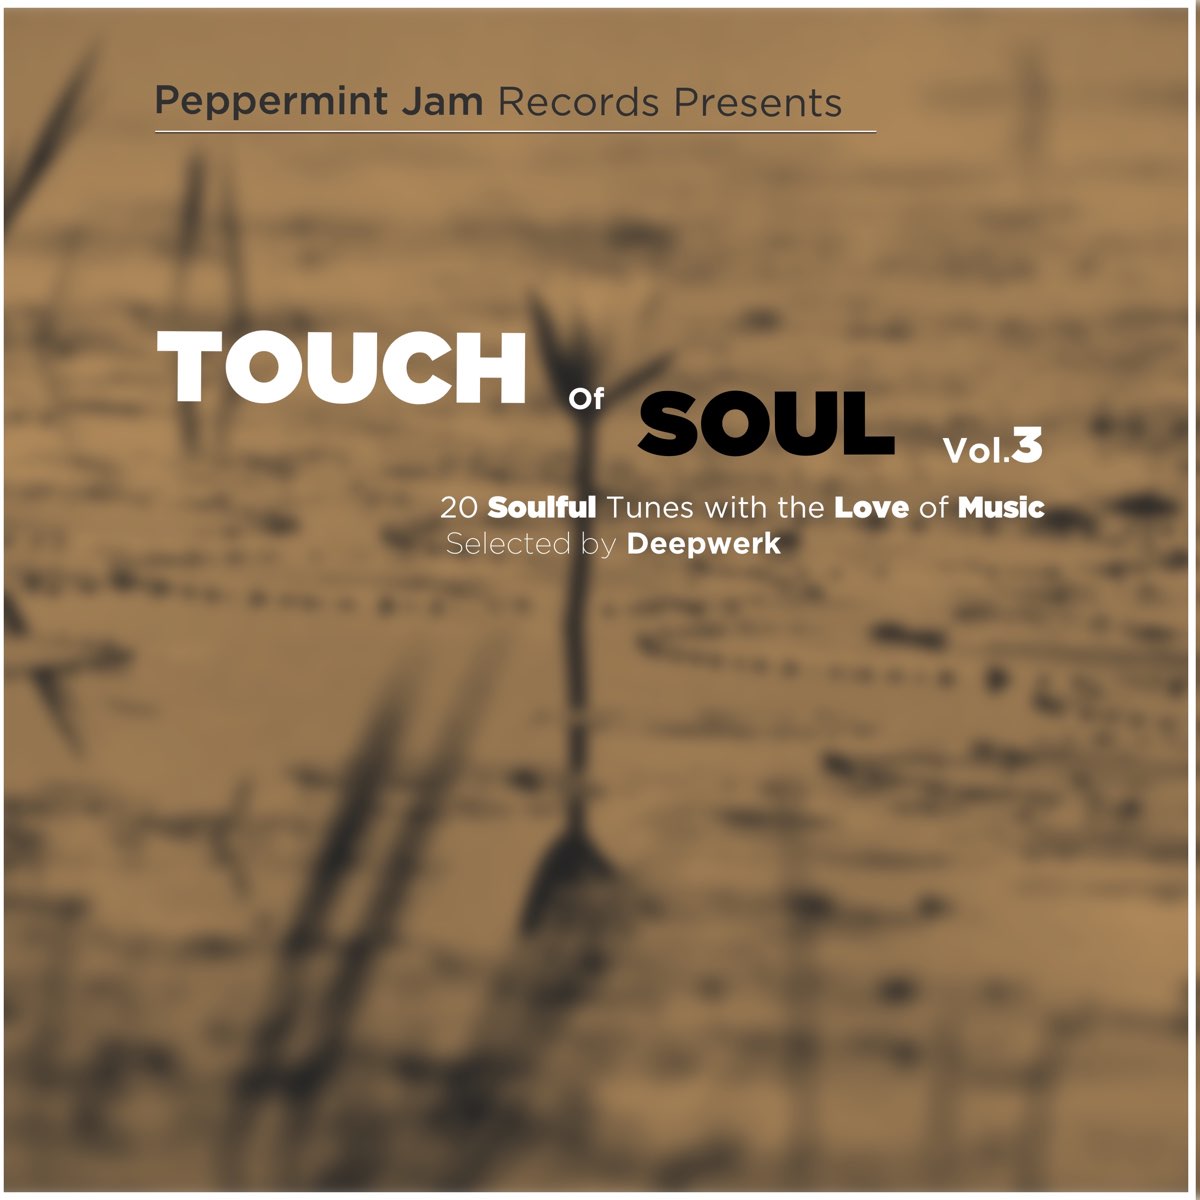 Rock funk tune soul. Touch of the Soul. Touch the Soul 0.4. Touch my Soul Vol CD. Touch mu Soul Vol 7.